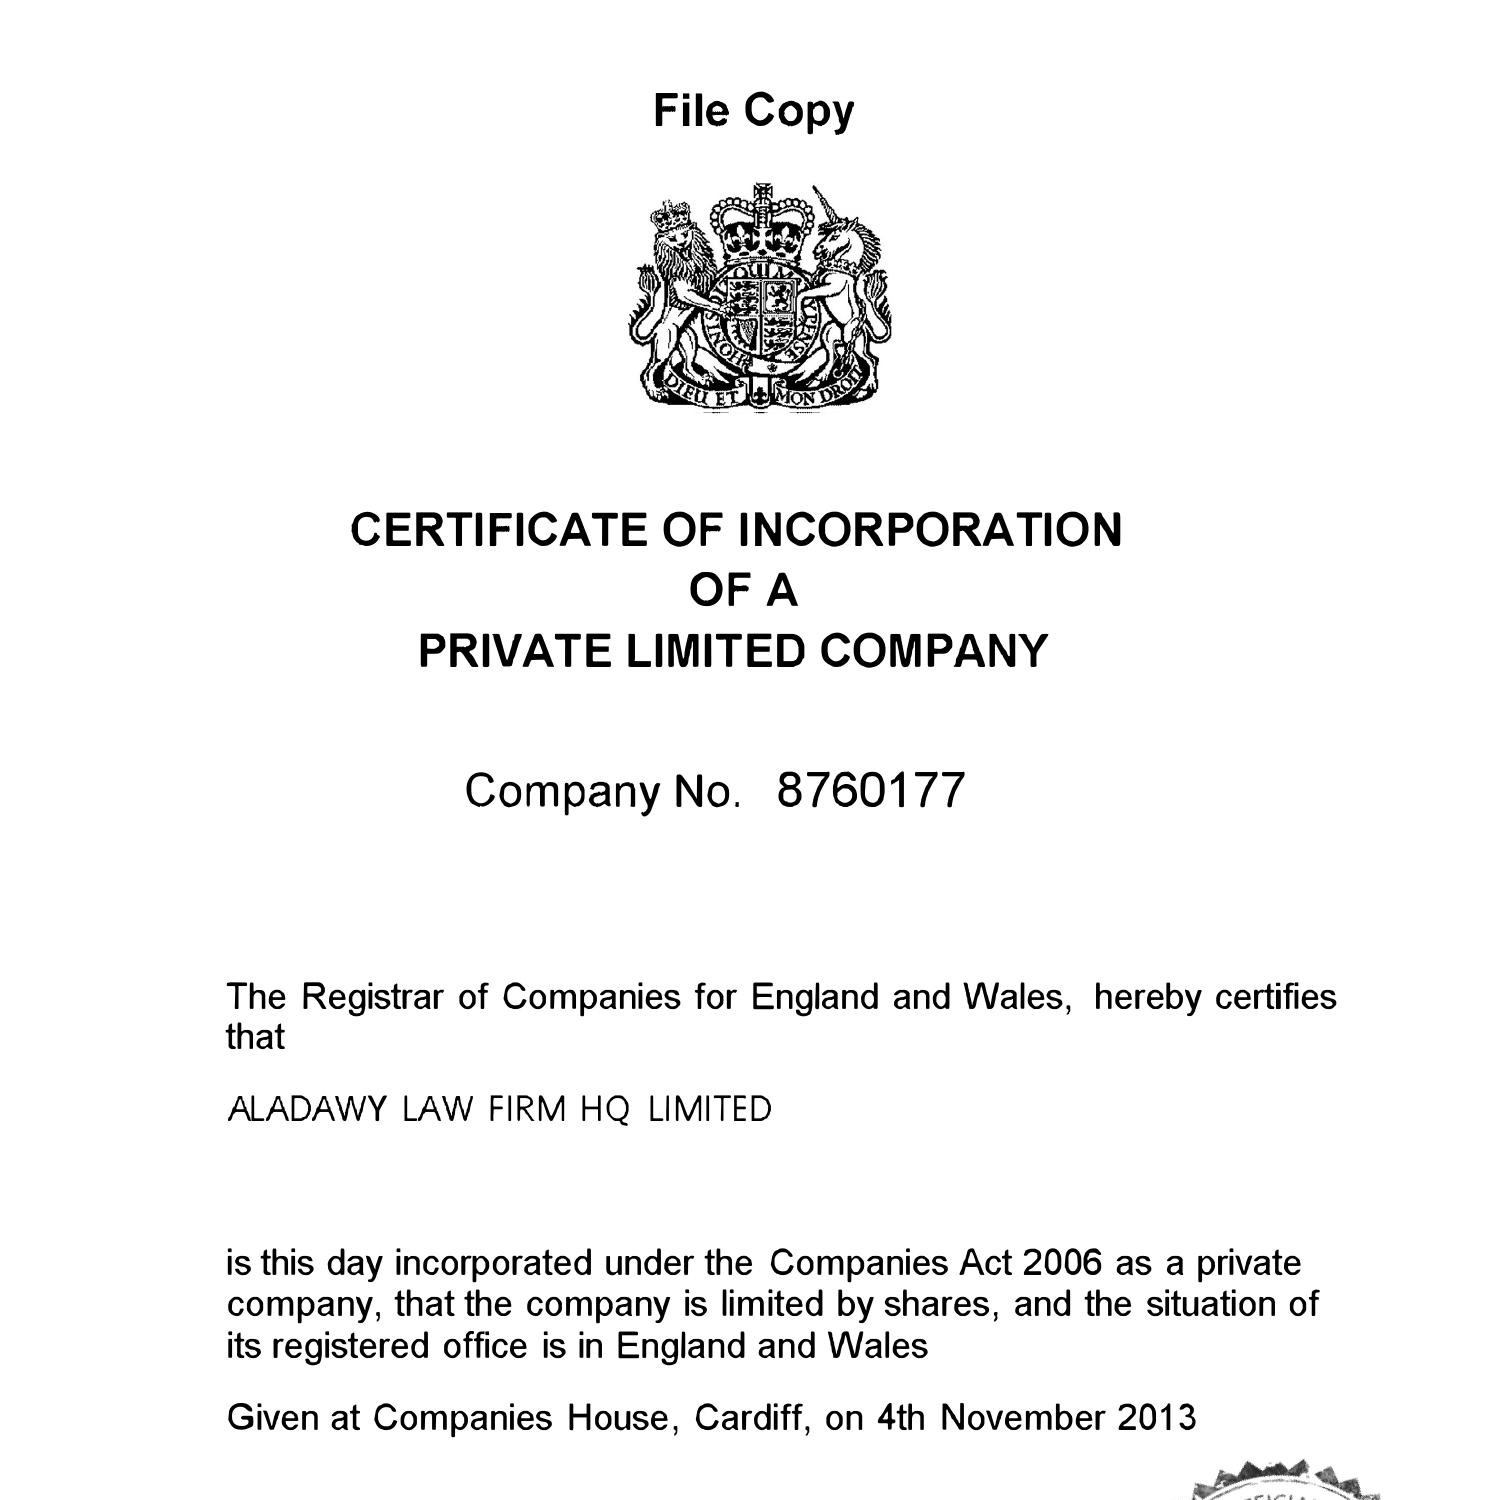 CERTIFICATE OF INCORPORATION ALADAWY LAW FIRM HQ LIMITED COPY.pdf ...